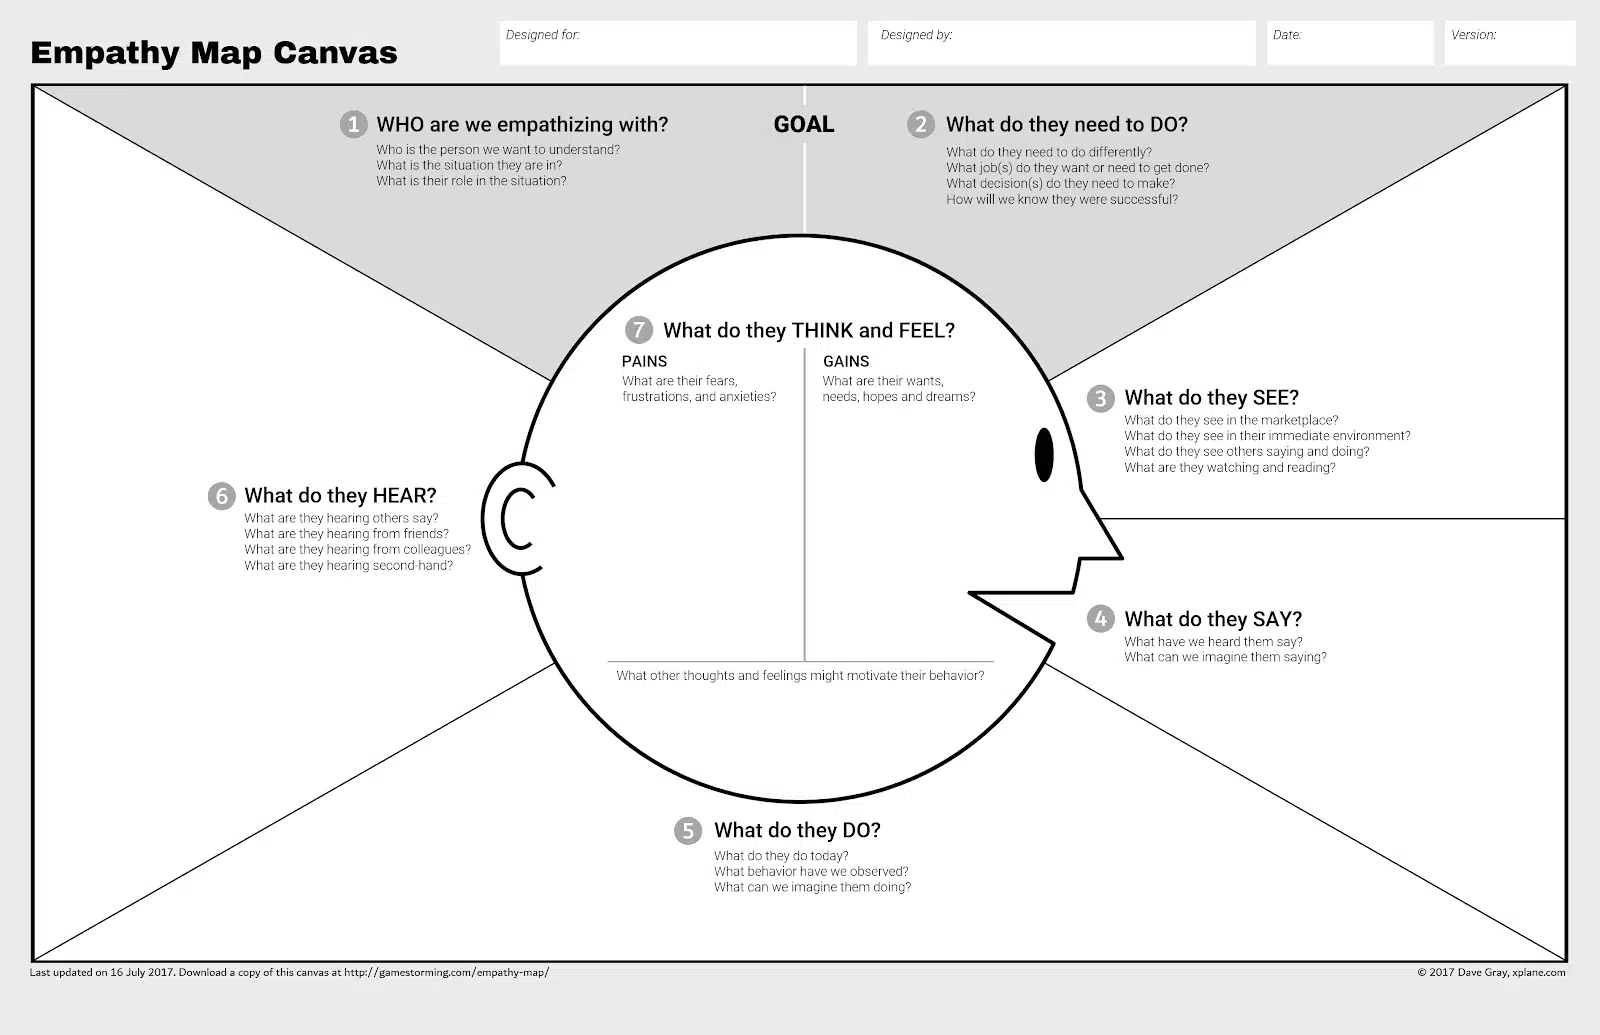 Create emotion-packed CTAs in content that converts with an empathy map.